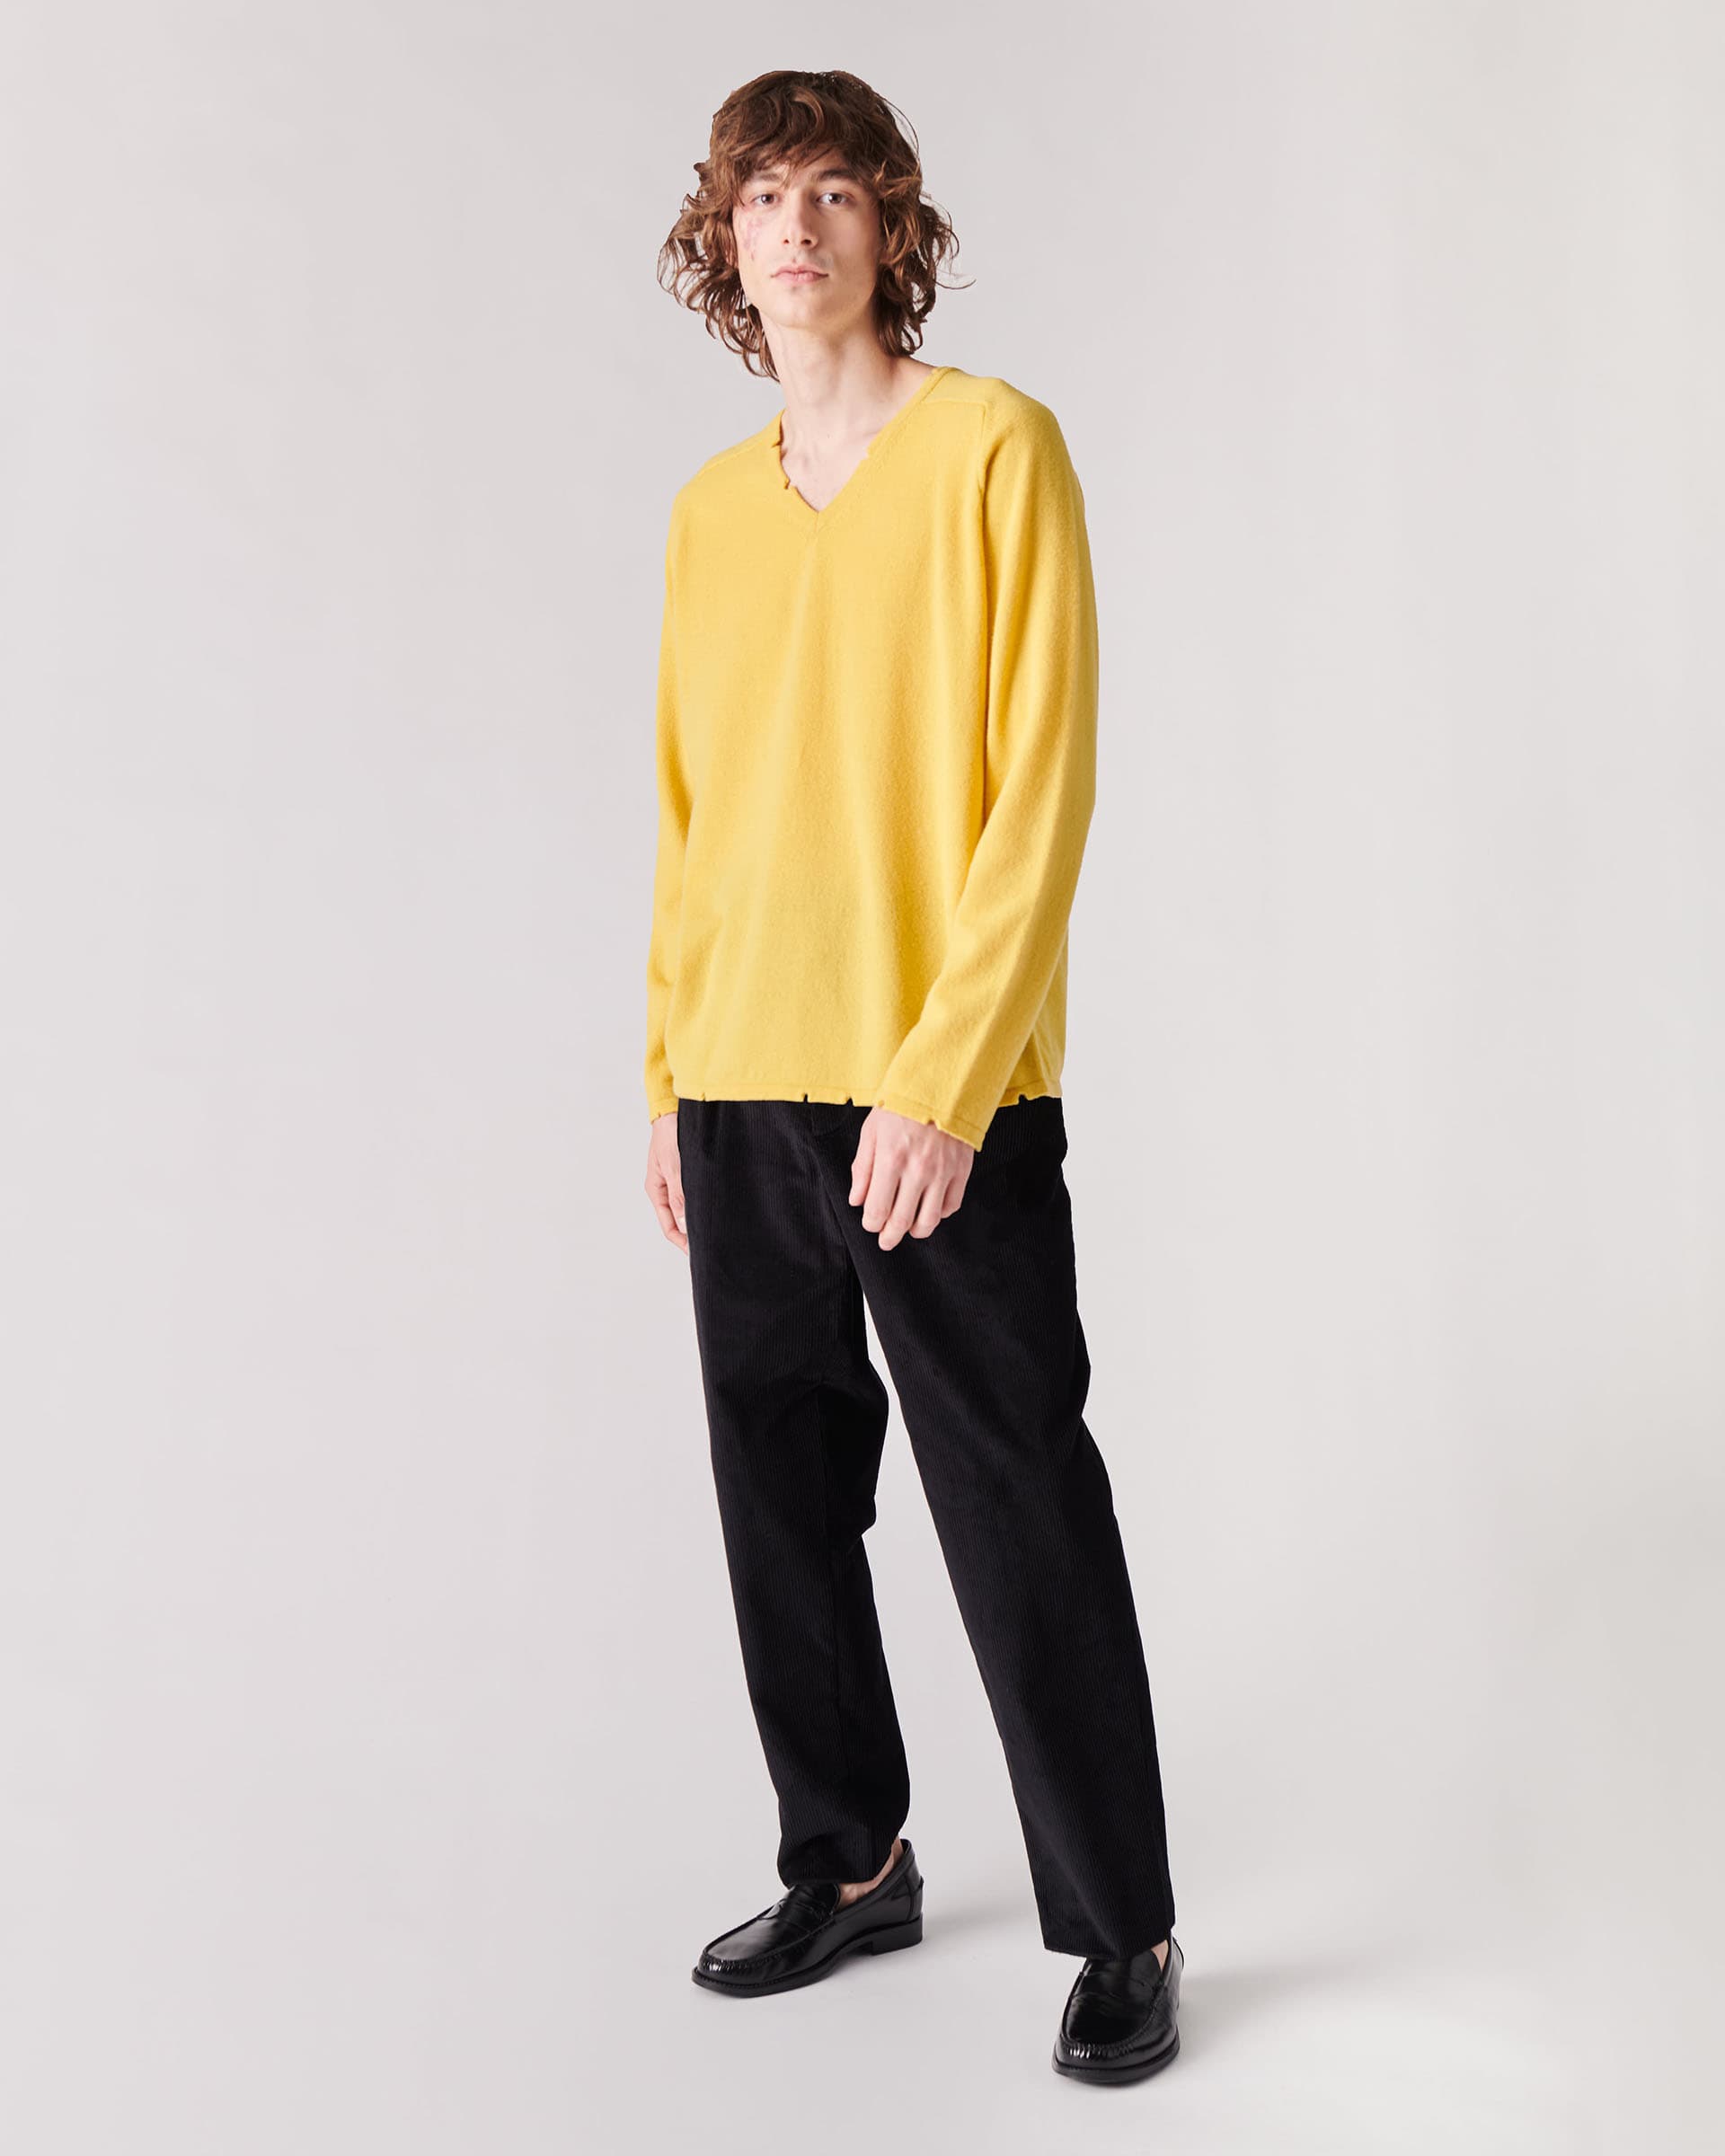 The Market Store | Crew Neck Sweater Without Breaks